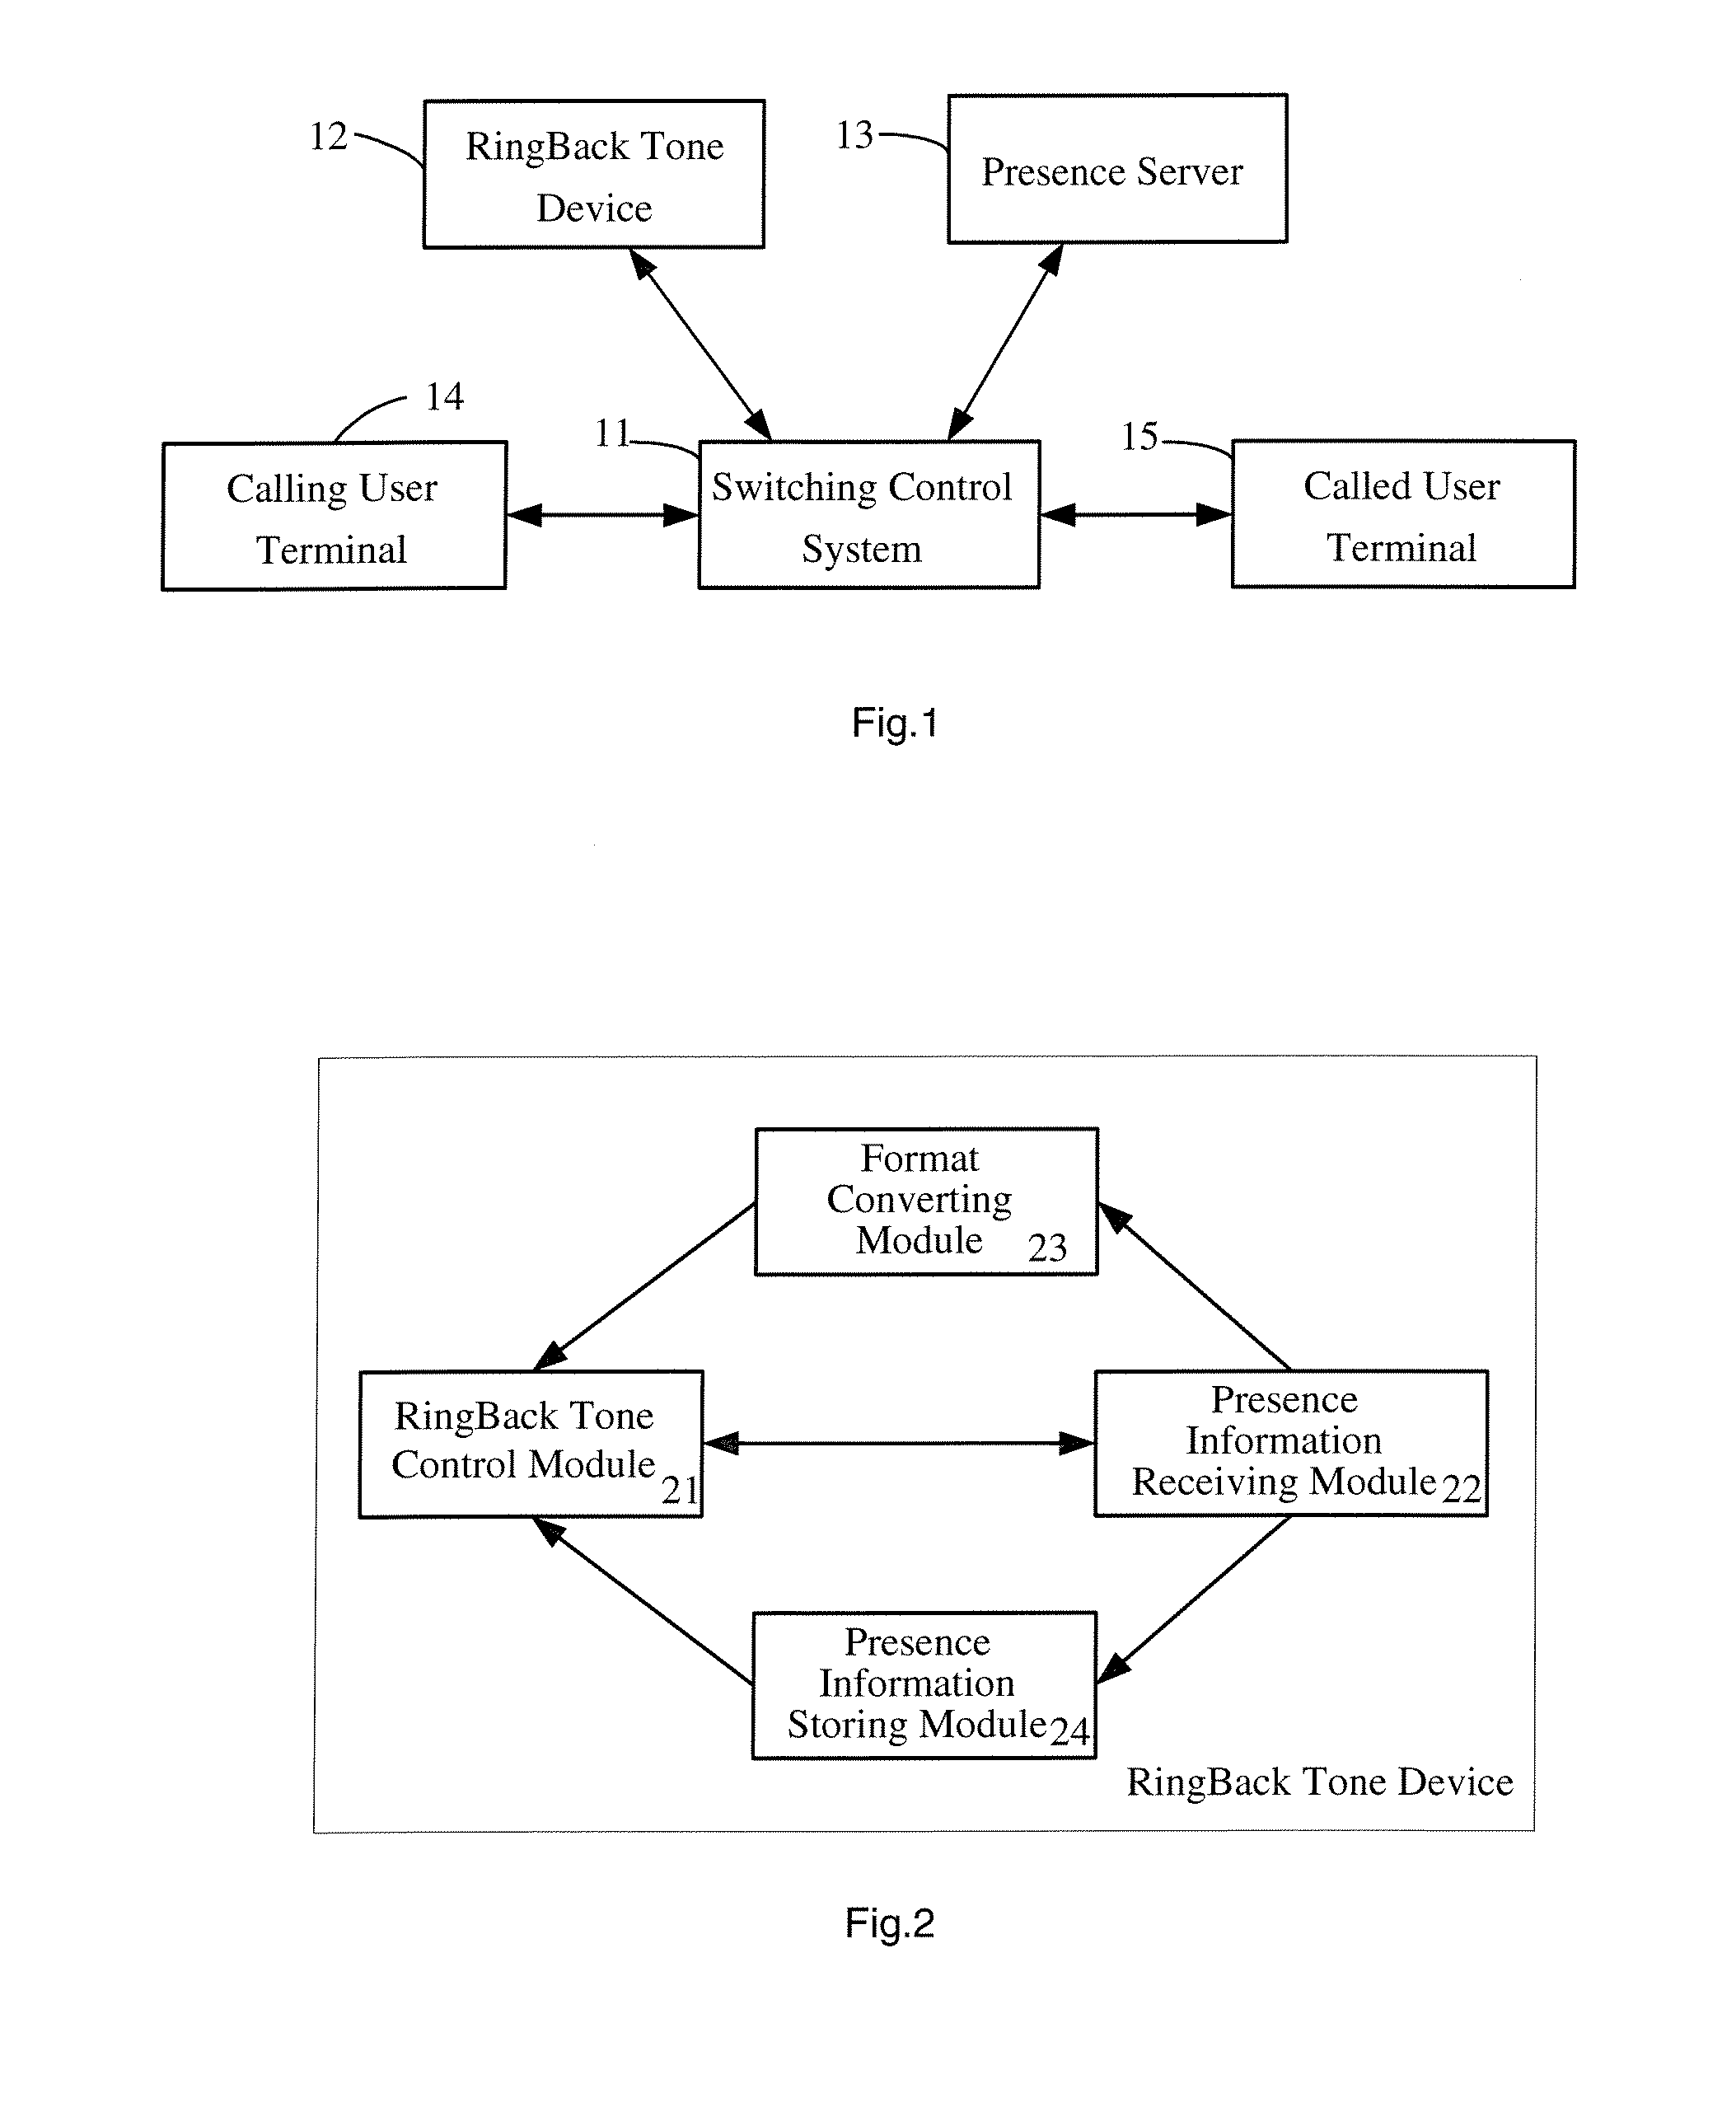 Method and system for providing presence information using ringback tone